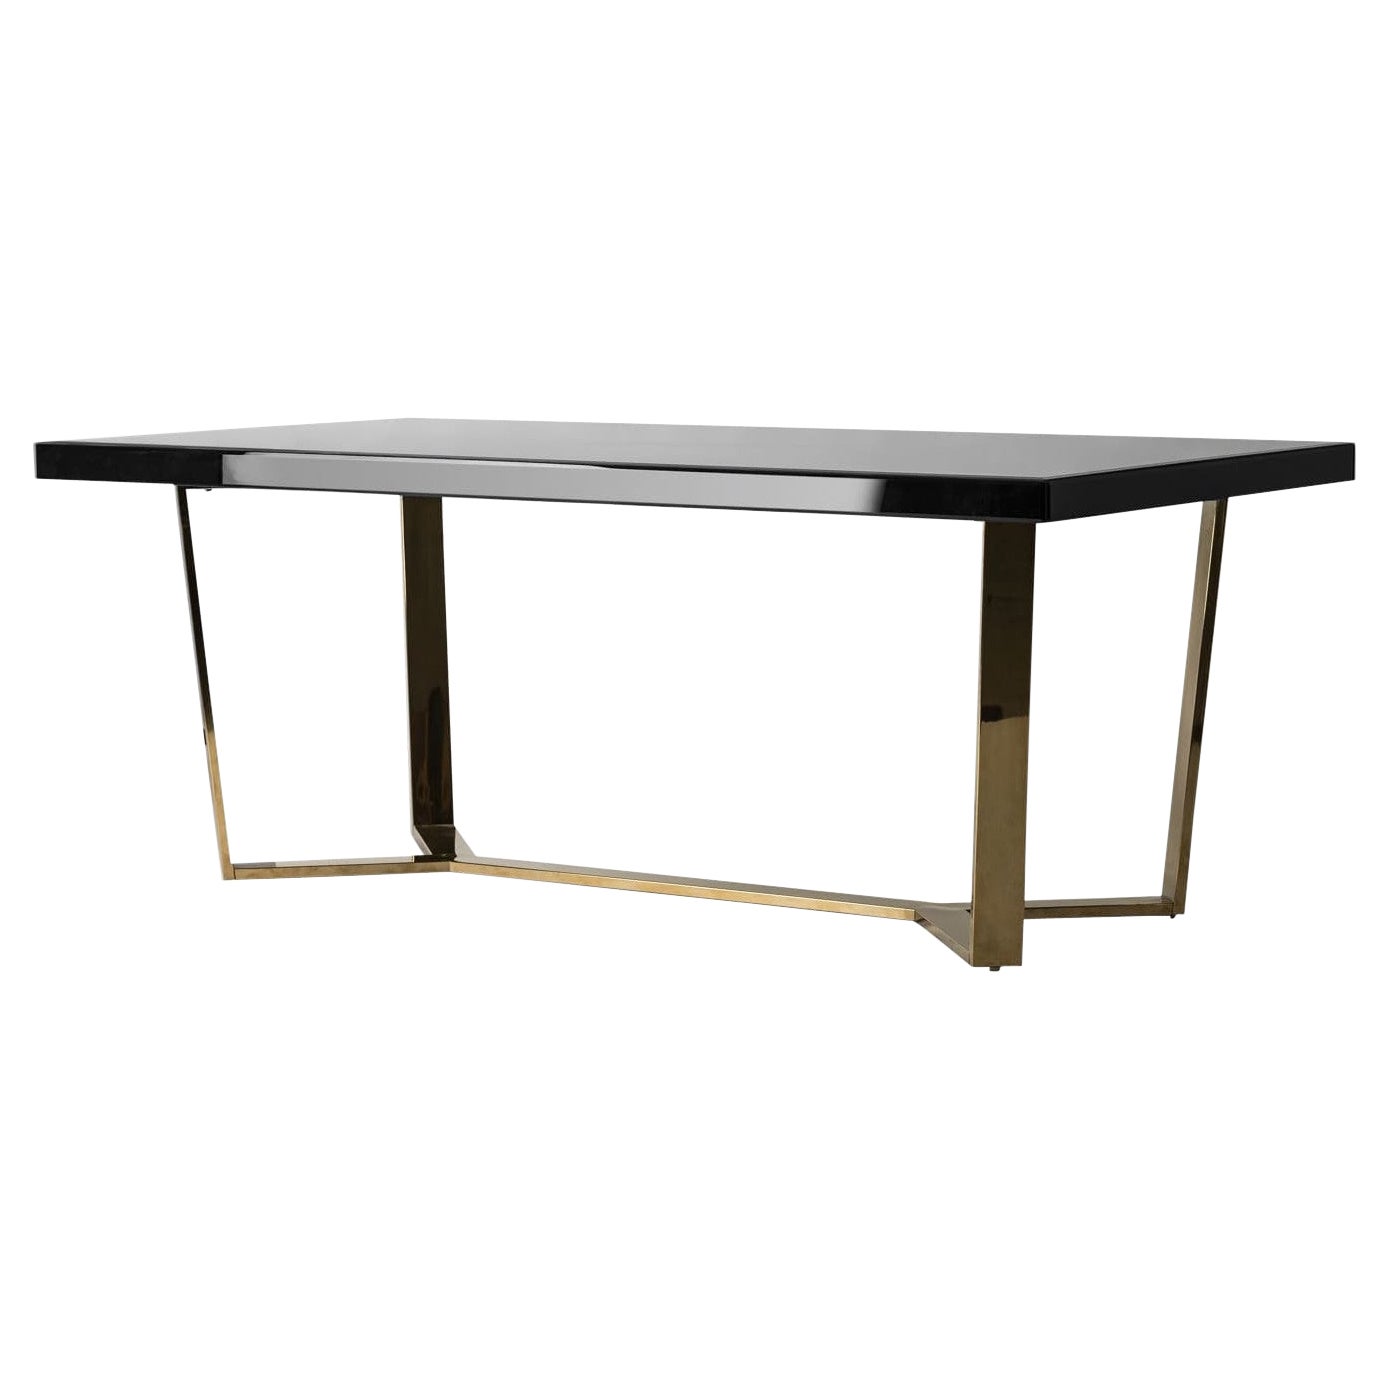 Black Bevelled Glass Tray with Gilded Metal Base Rectangular Table